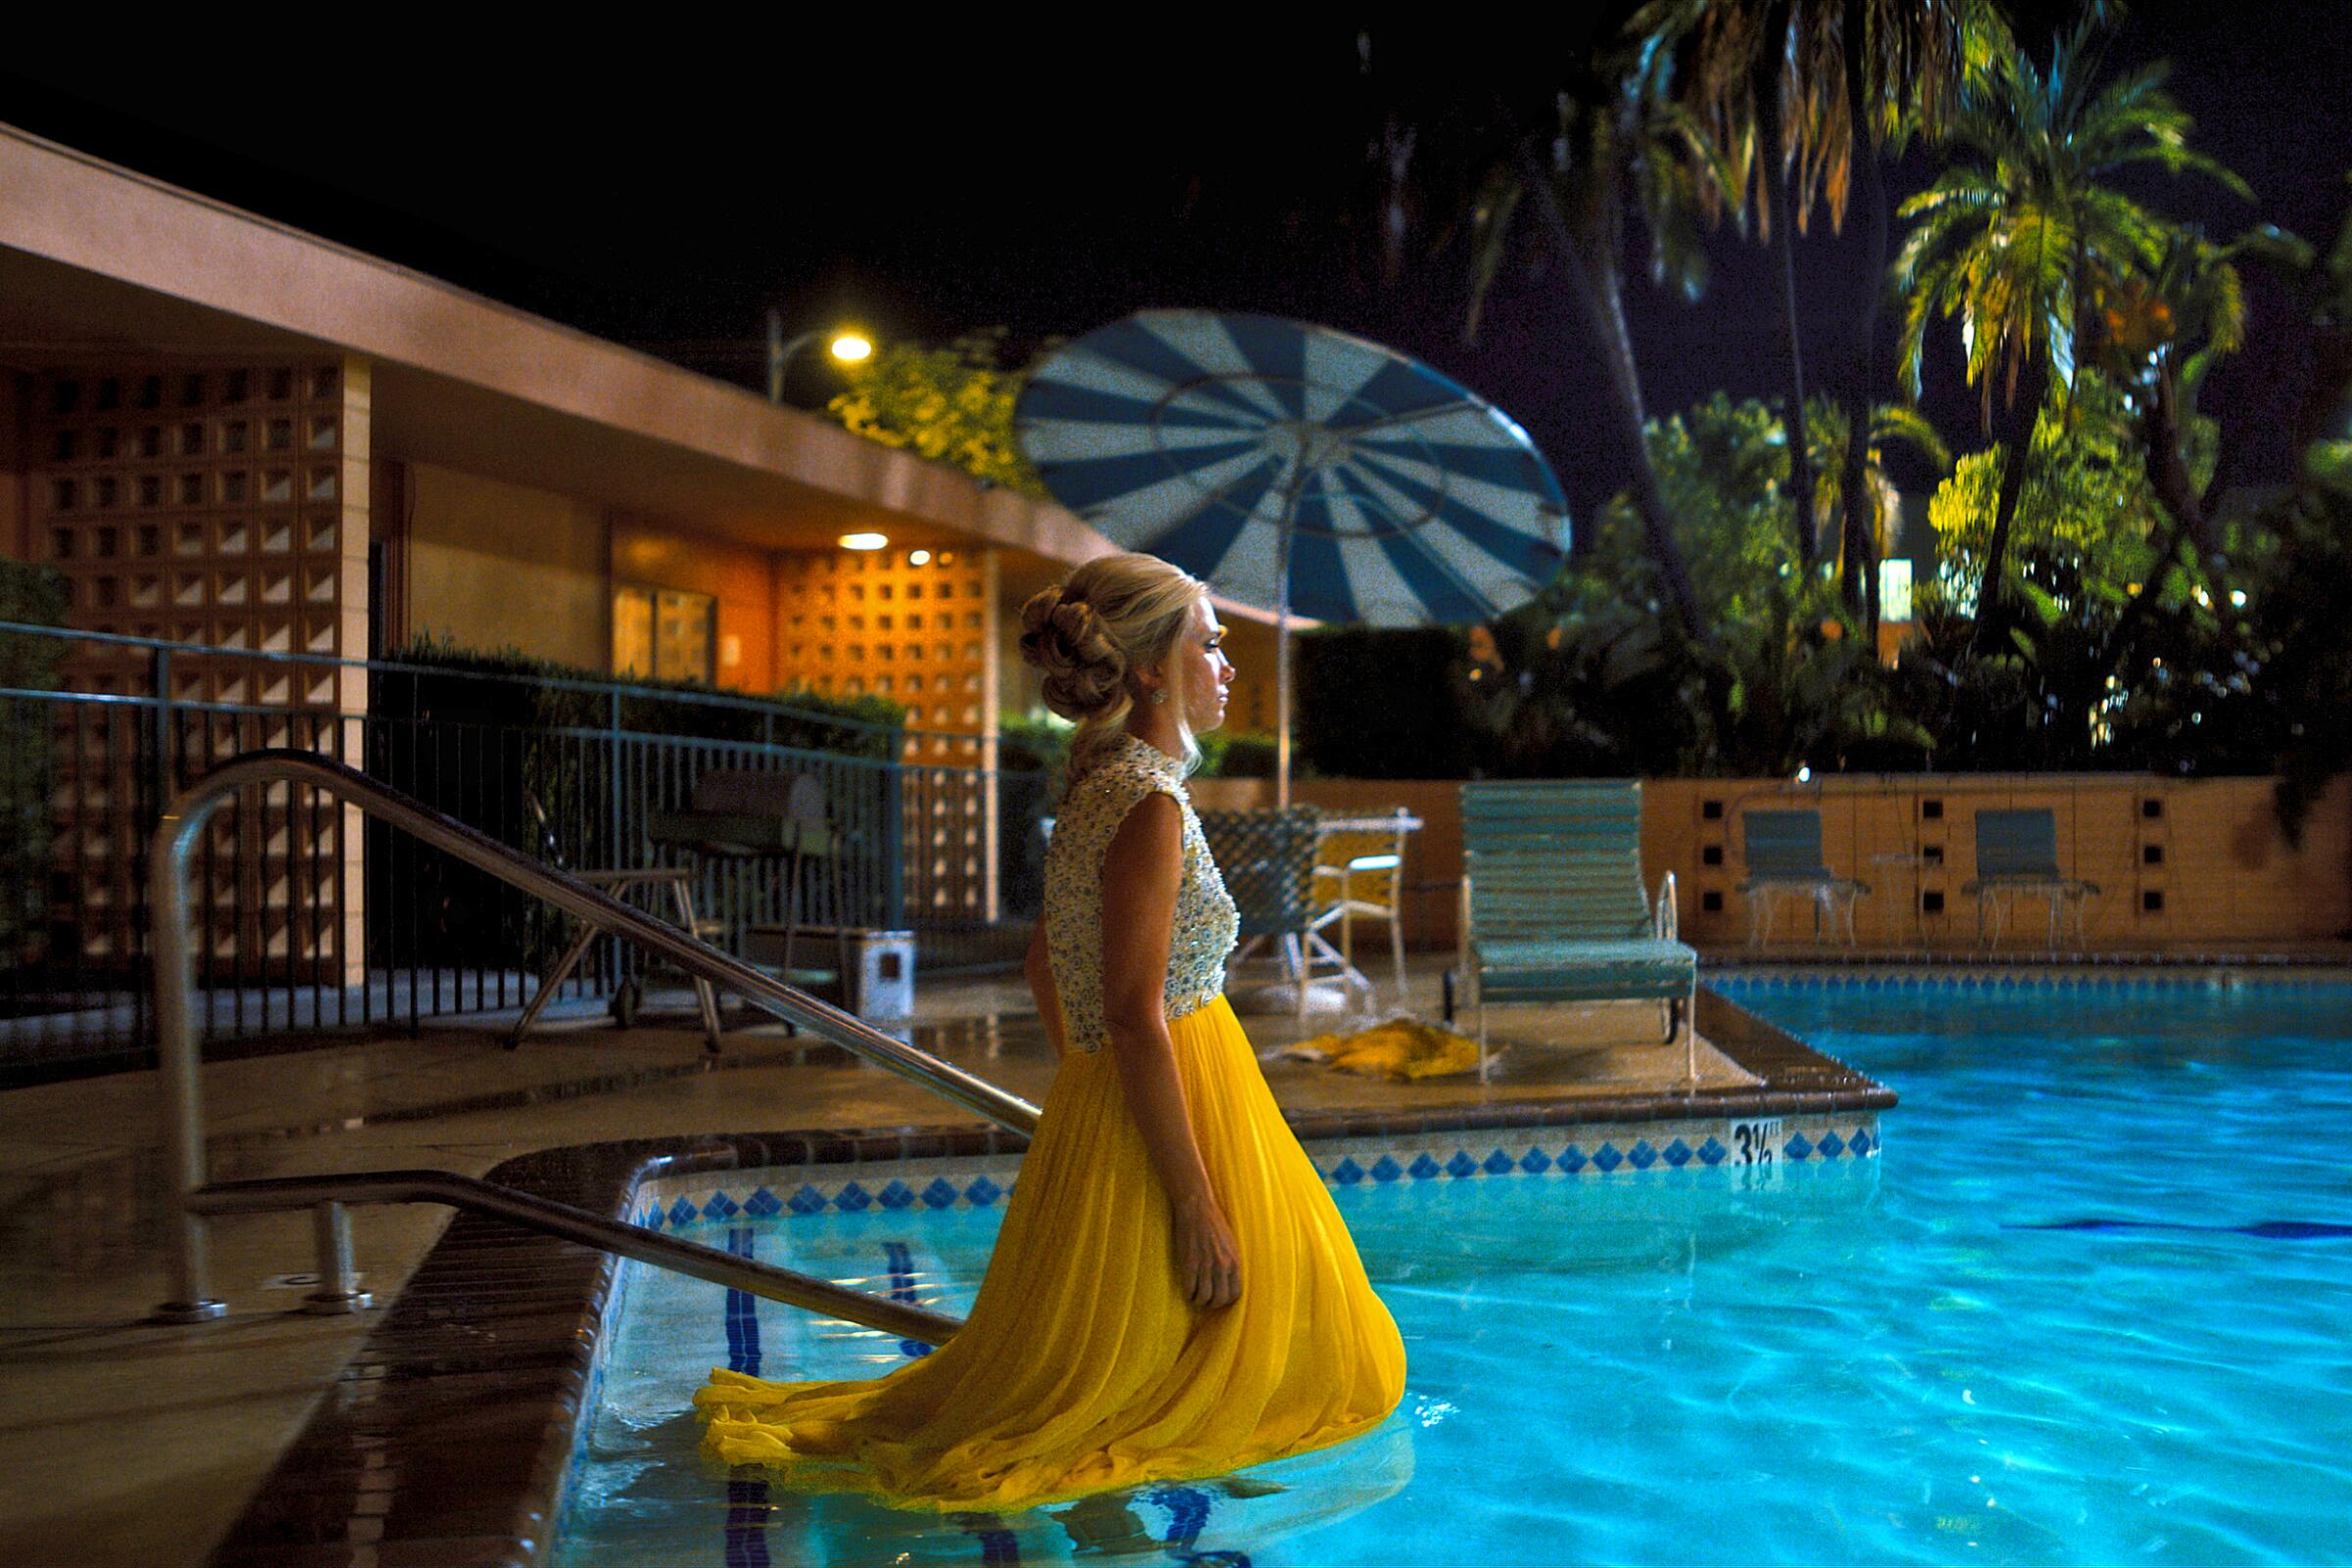 A woman in a yellow dress walks into a swimming pool at night